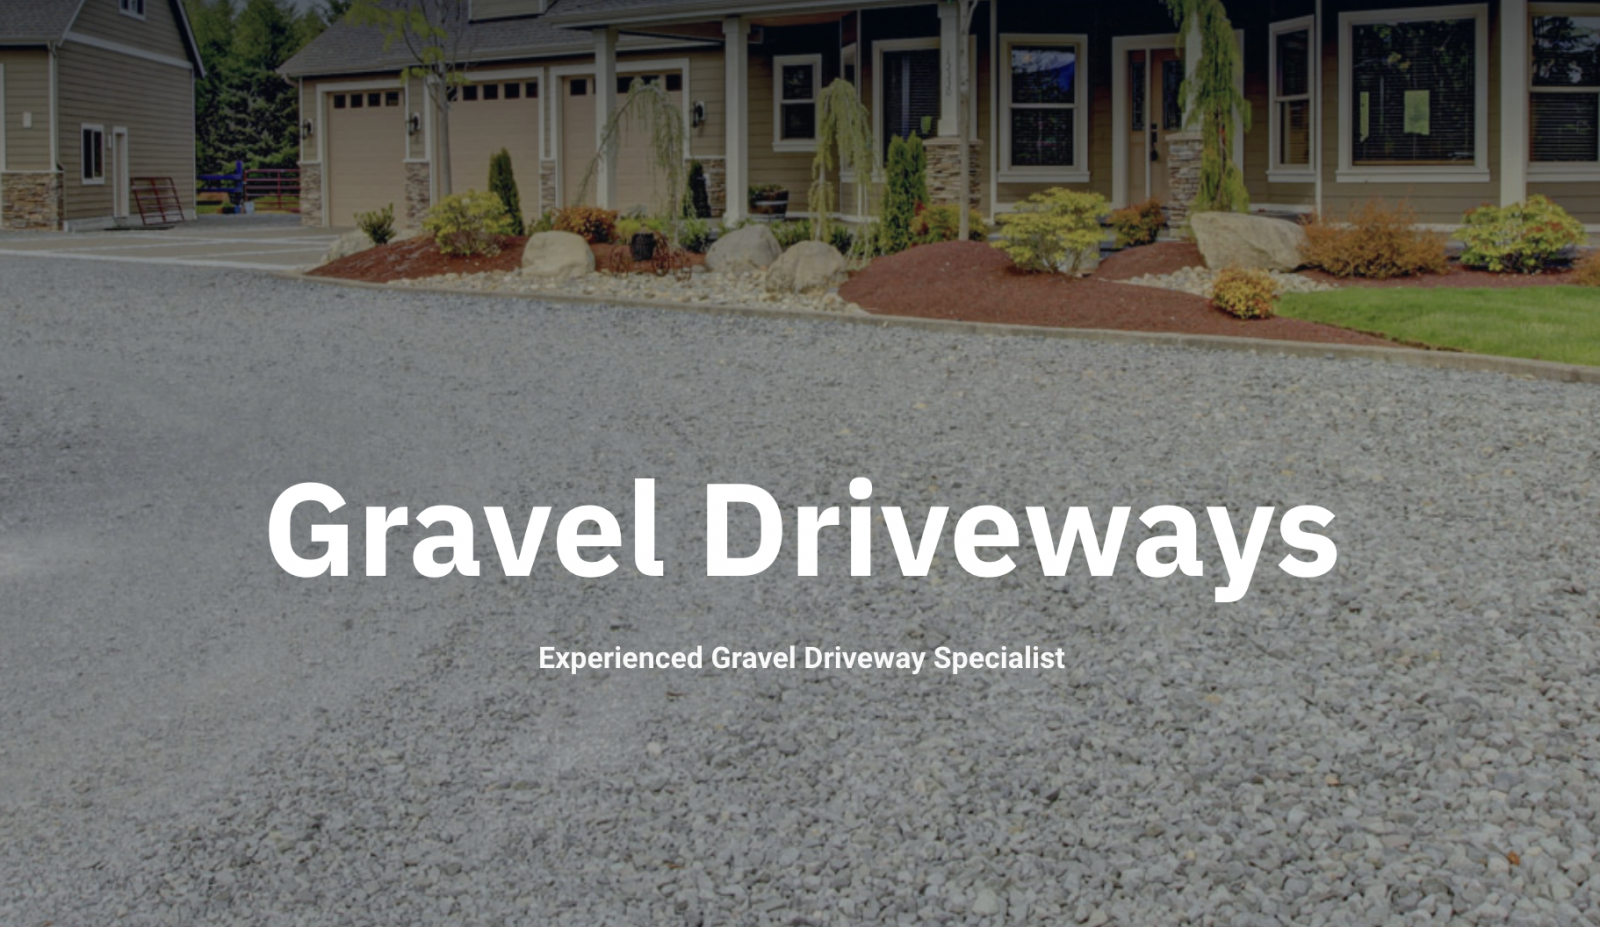 5 Essential Tips for Maintaining Your Gravel Driveway